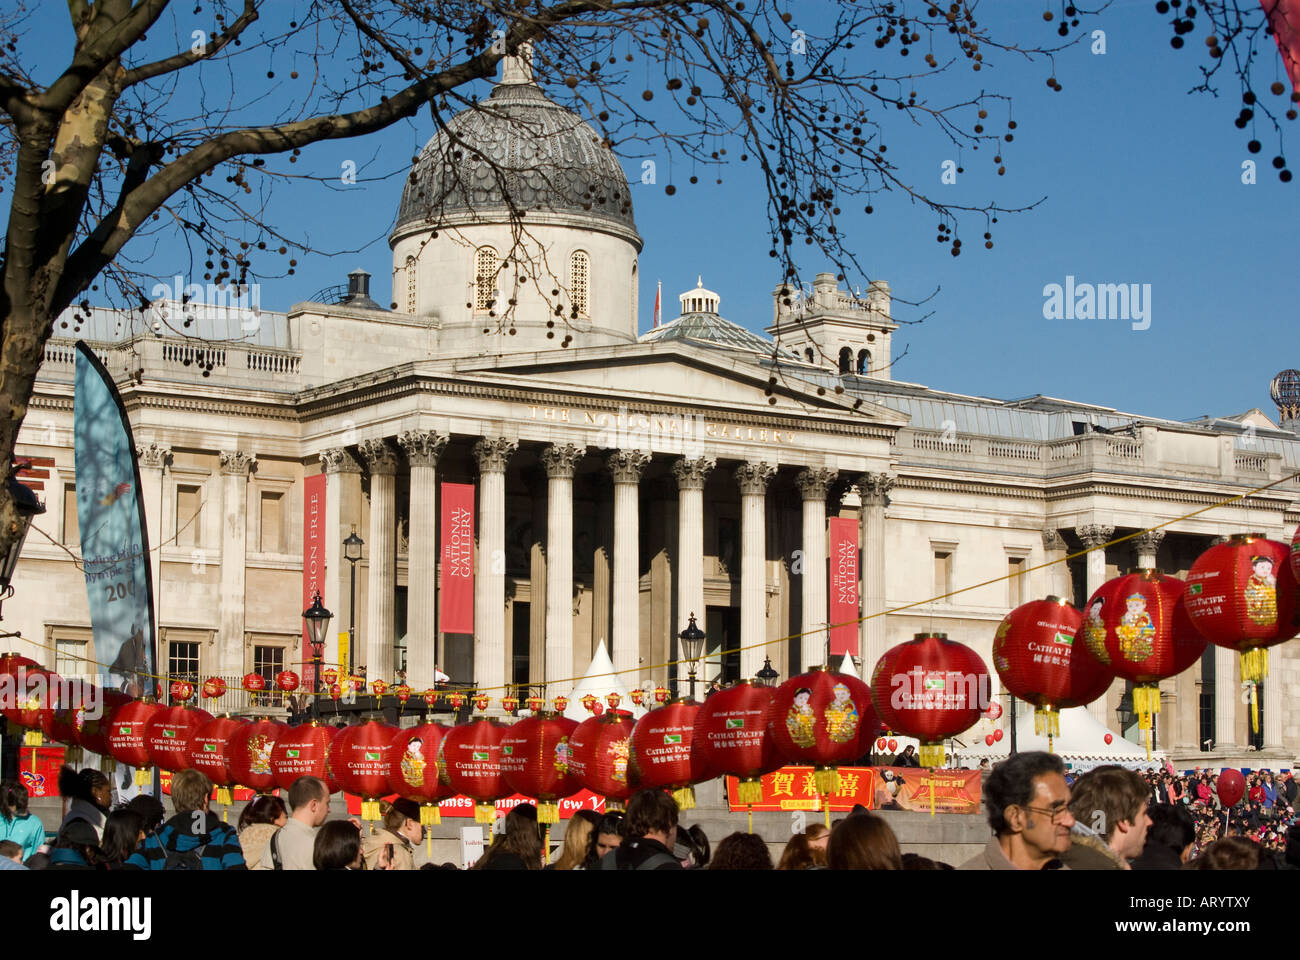 Crowds gathered in Trafalgar Square for Chinese New Year celebrations in London 2008 Stock Photo